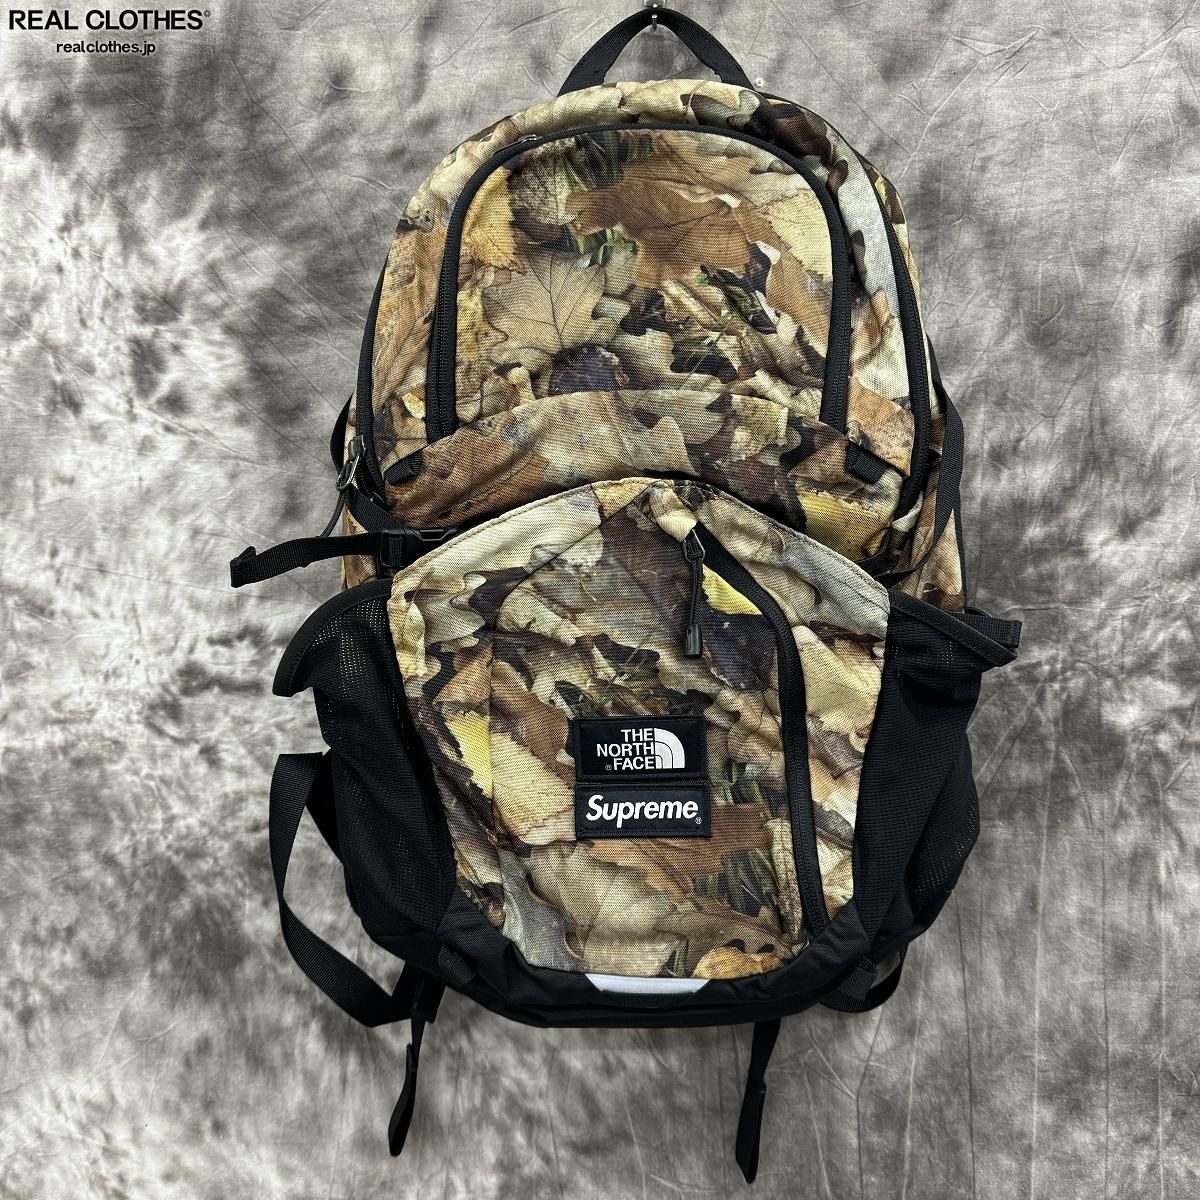 Supreme×THE NORTH FACE/シュプリーム×ノースフェイス【16AW】Pocono Backpack/バックパック Leaves  NF00CLG6 | REALCLOTHES/リアルクローズ